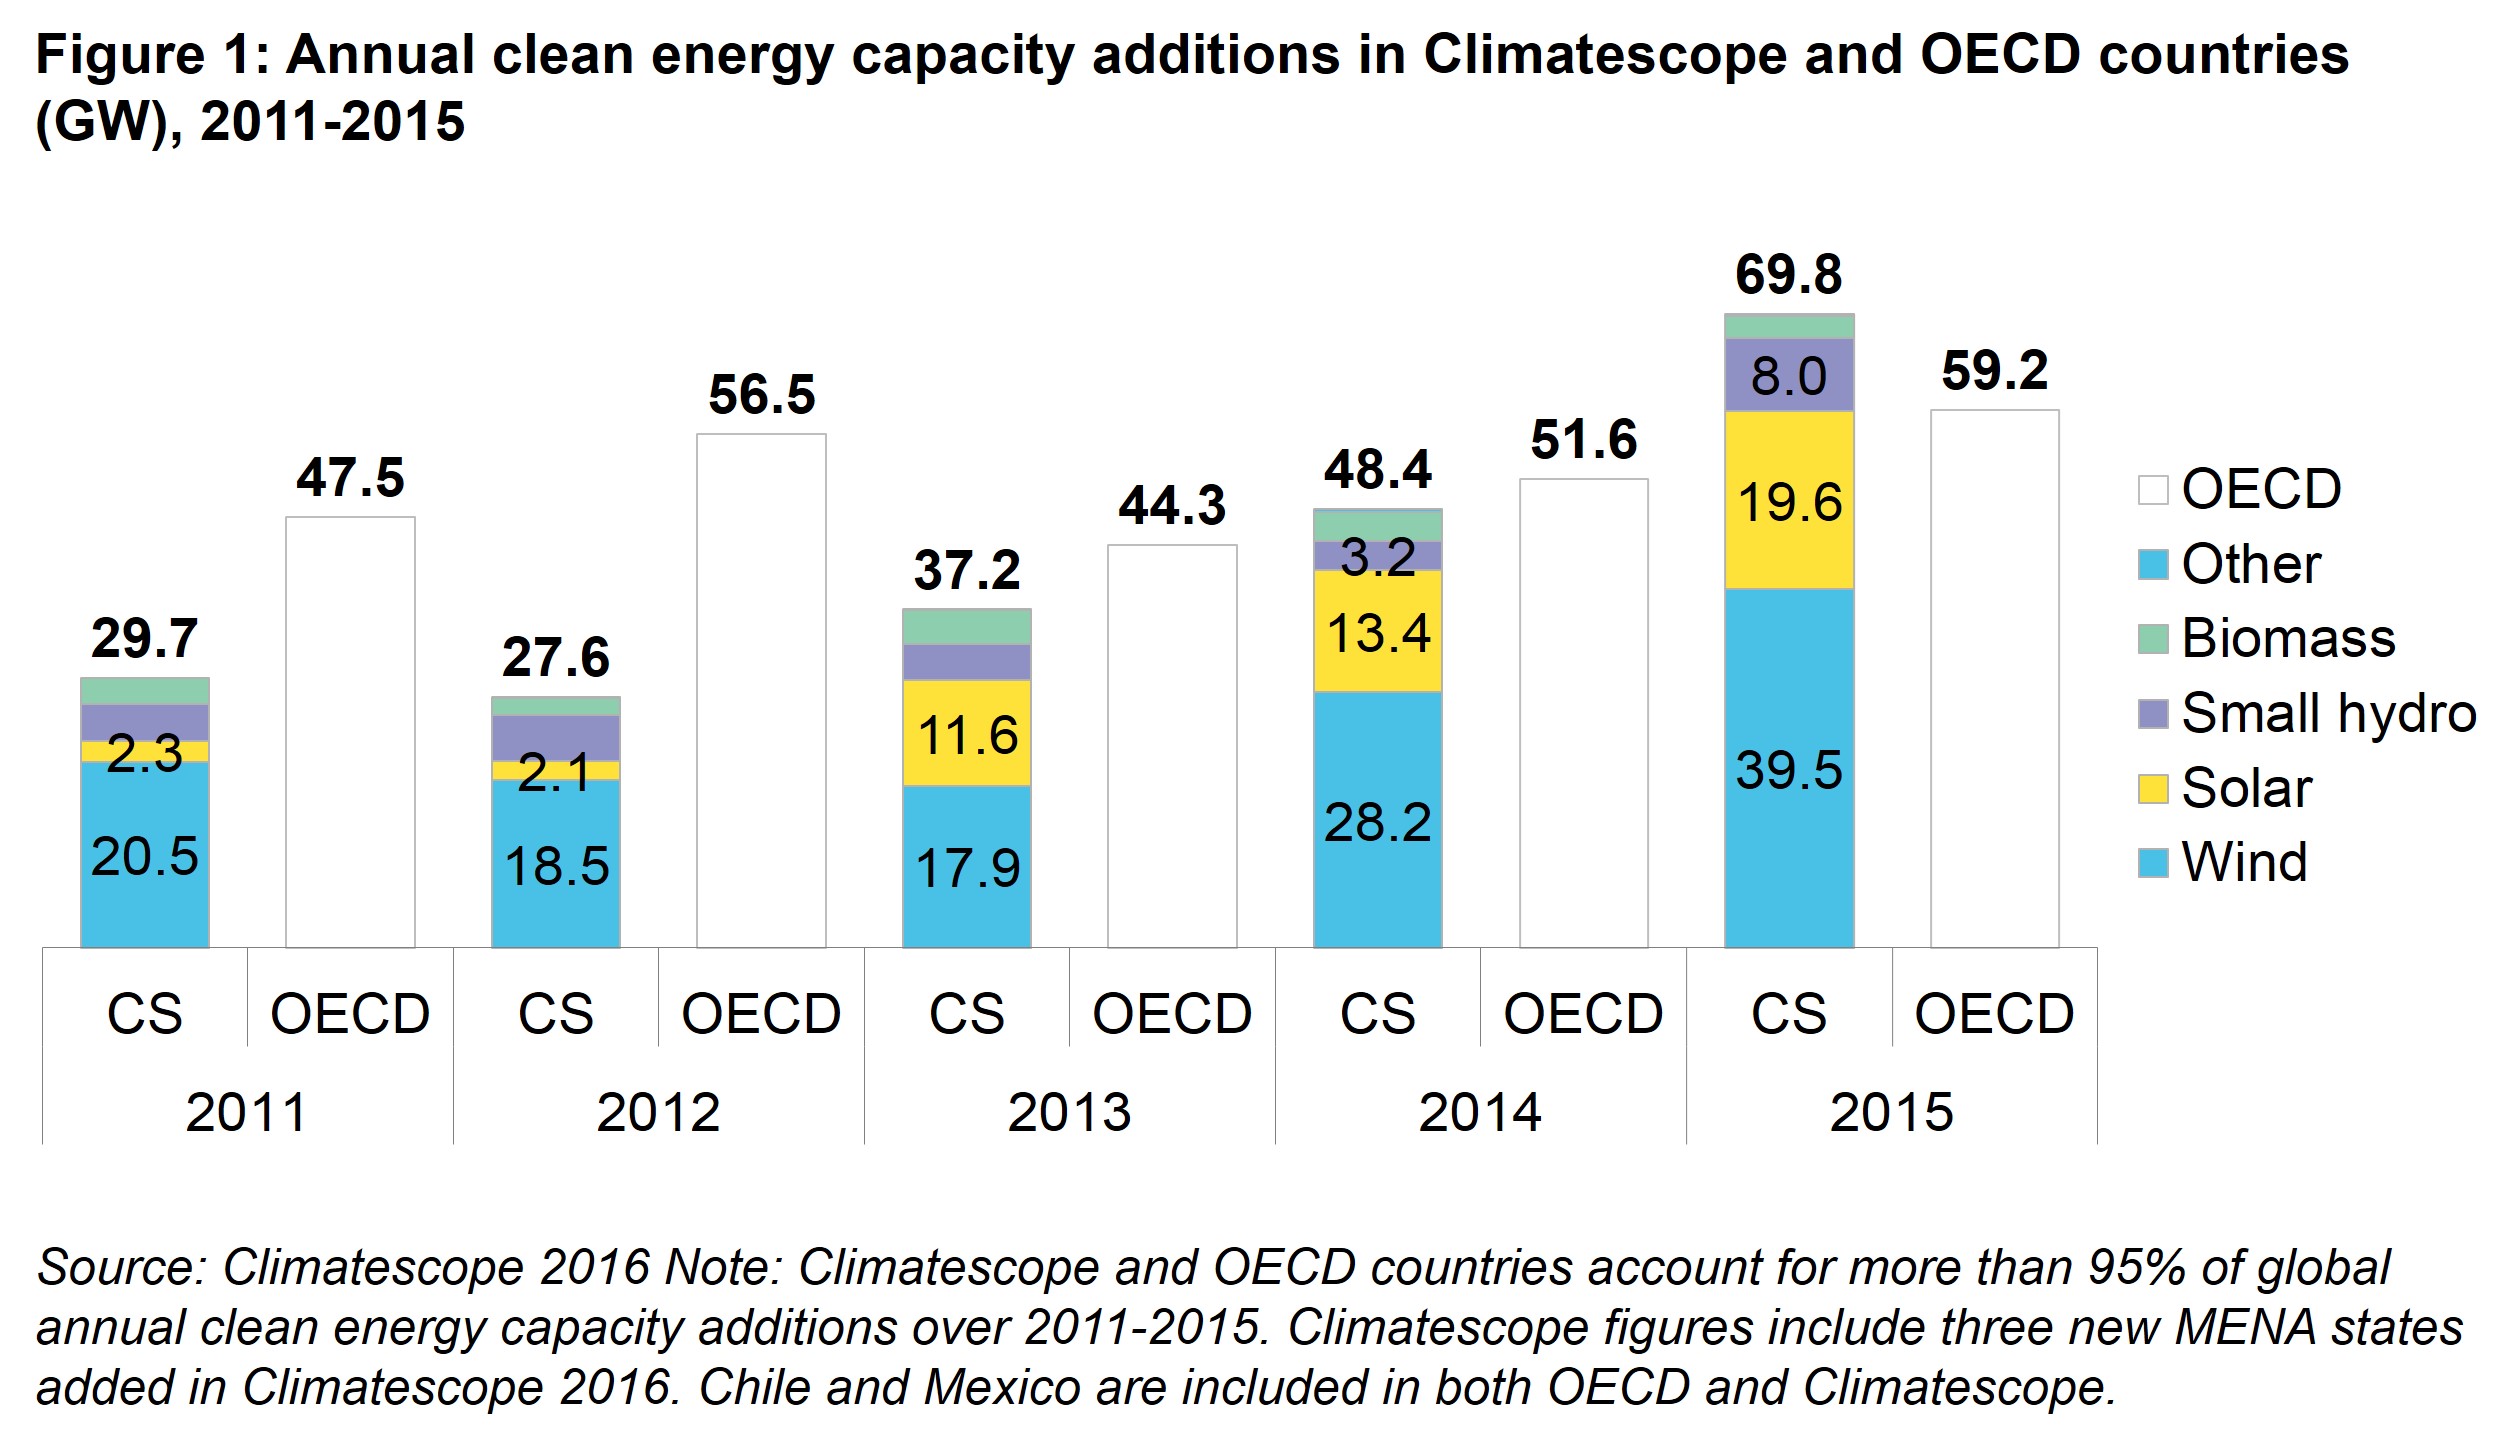 PII Fig 1 - Annual clean energy investment in Climatescope and OECD countries ($bn), 2011-2015